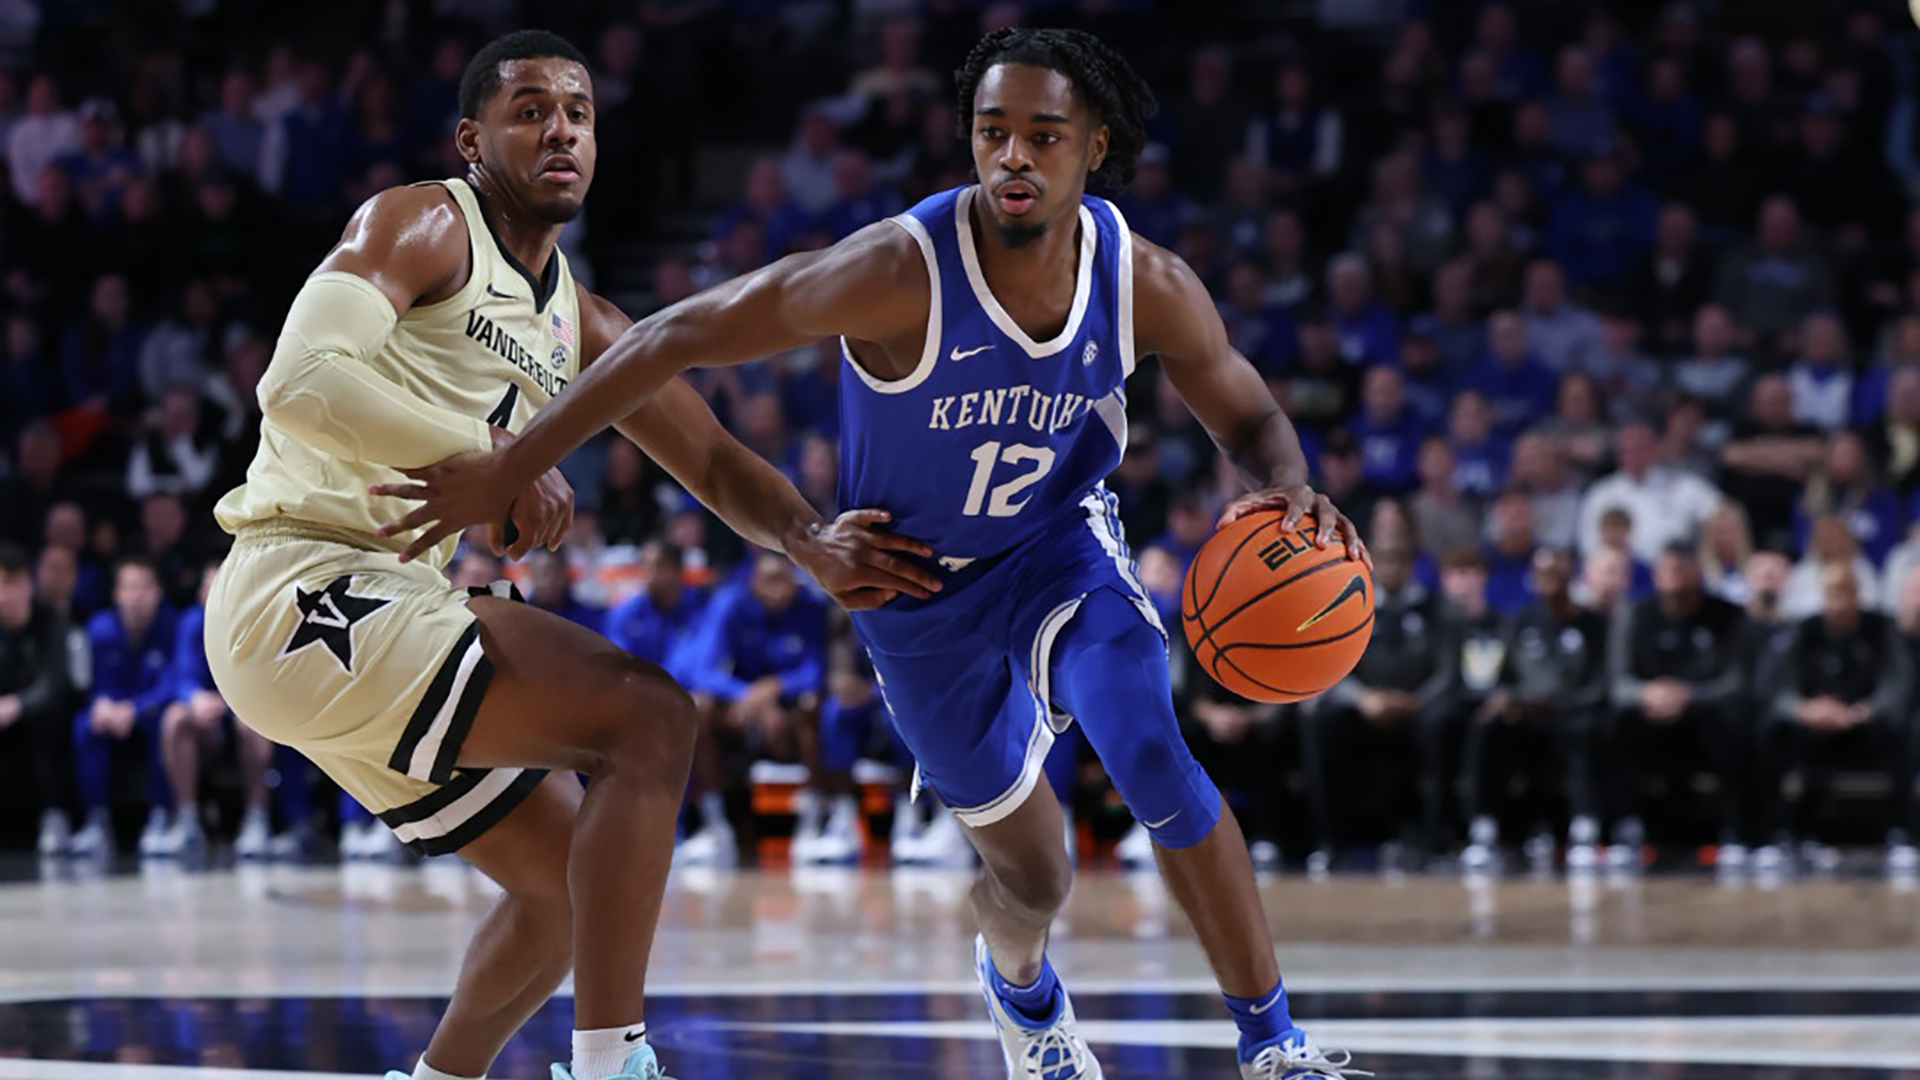 Balanced Cats Cruise Past Commodores in Nashville